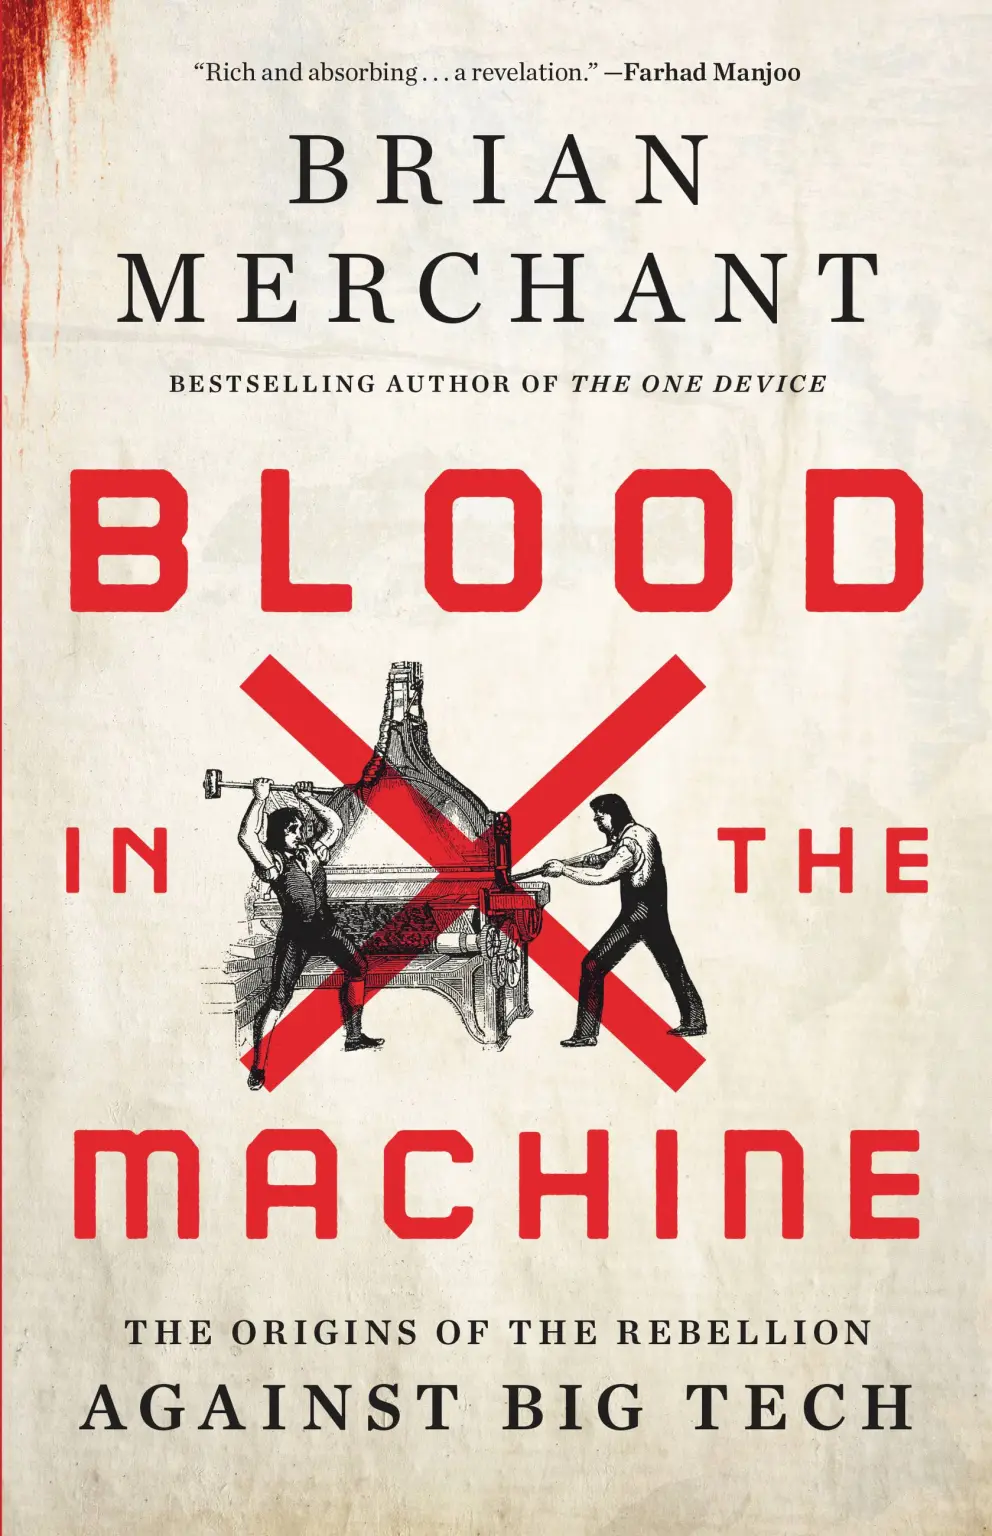 The cover of 'Blood in the Machine: The Origins of the Rebellion Against Big Tech' by Brian Merchant. The words "Blood in the Machine" are in red, along with a large X covering an etching of two people working in a factory, one with a sledgehammer raised above his head.